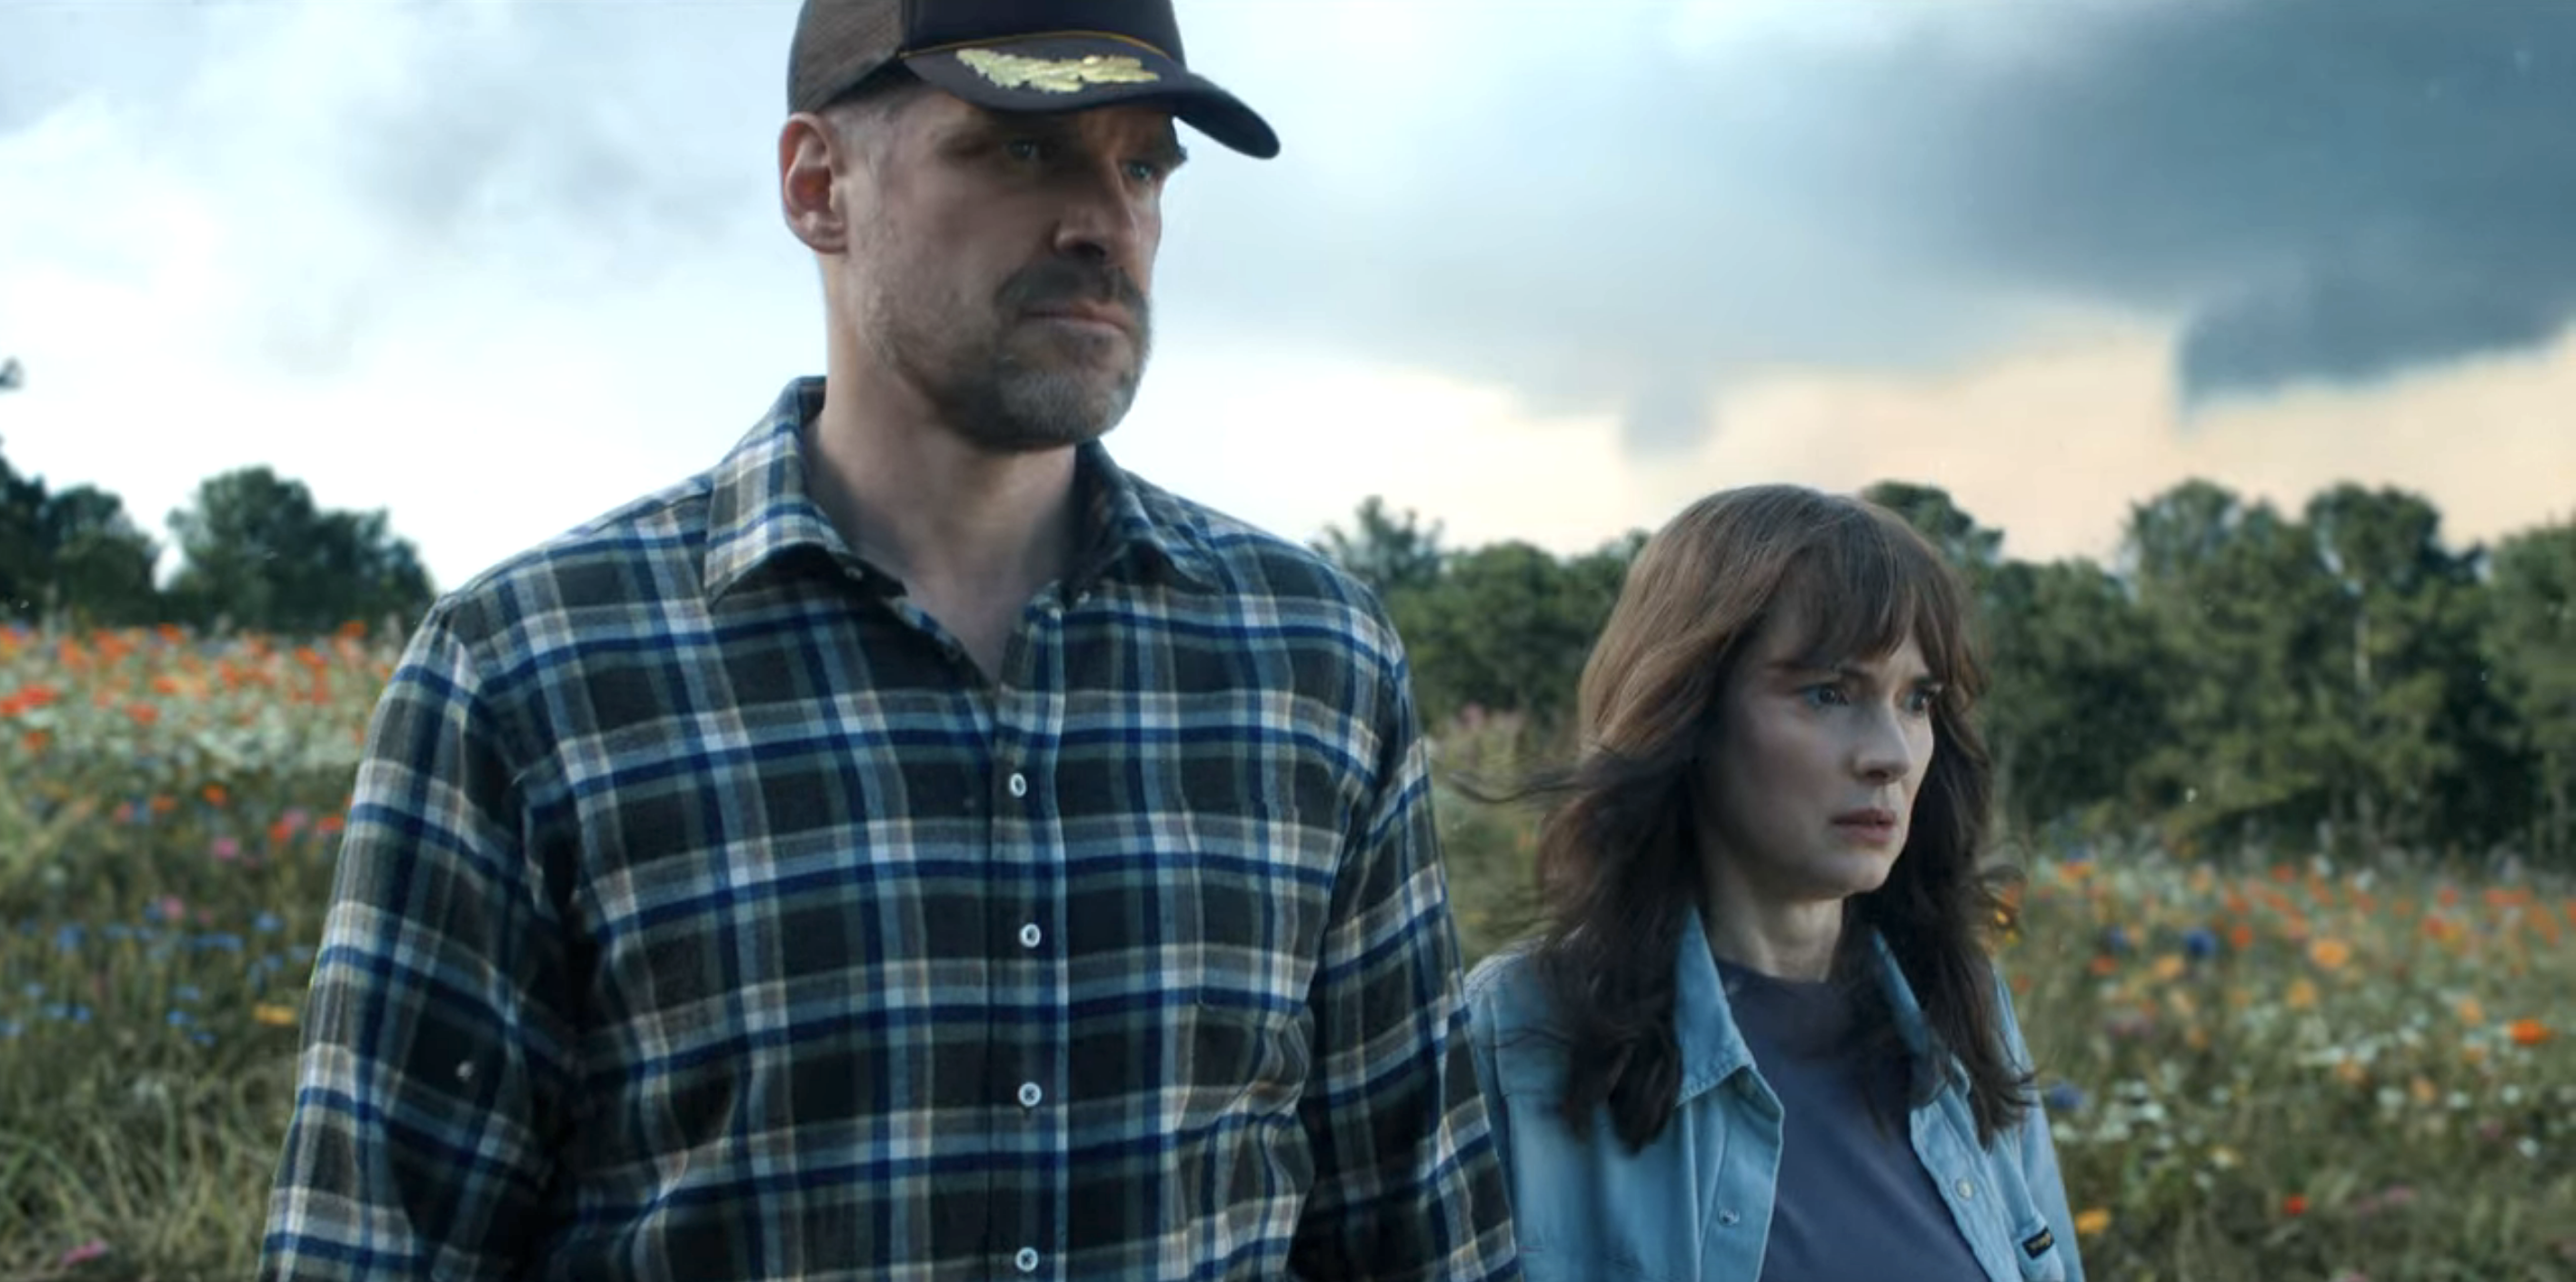 Hopper in a cap and plaid shirt and Joyce standing in a field with flowers